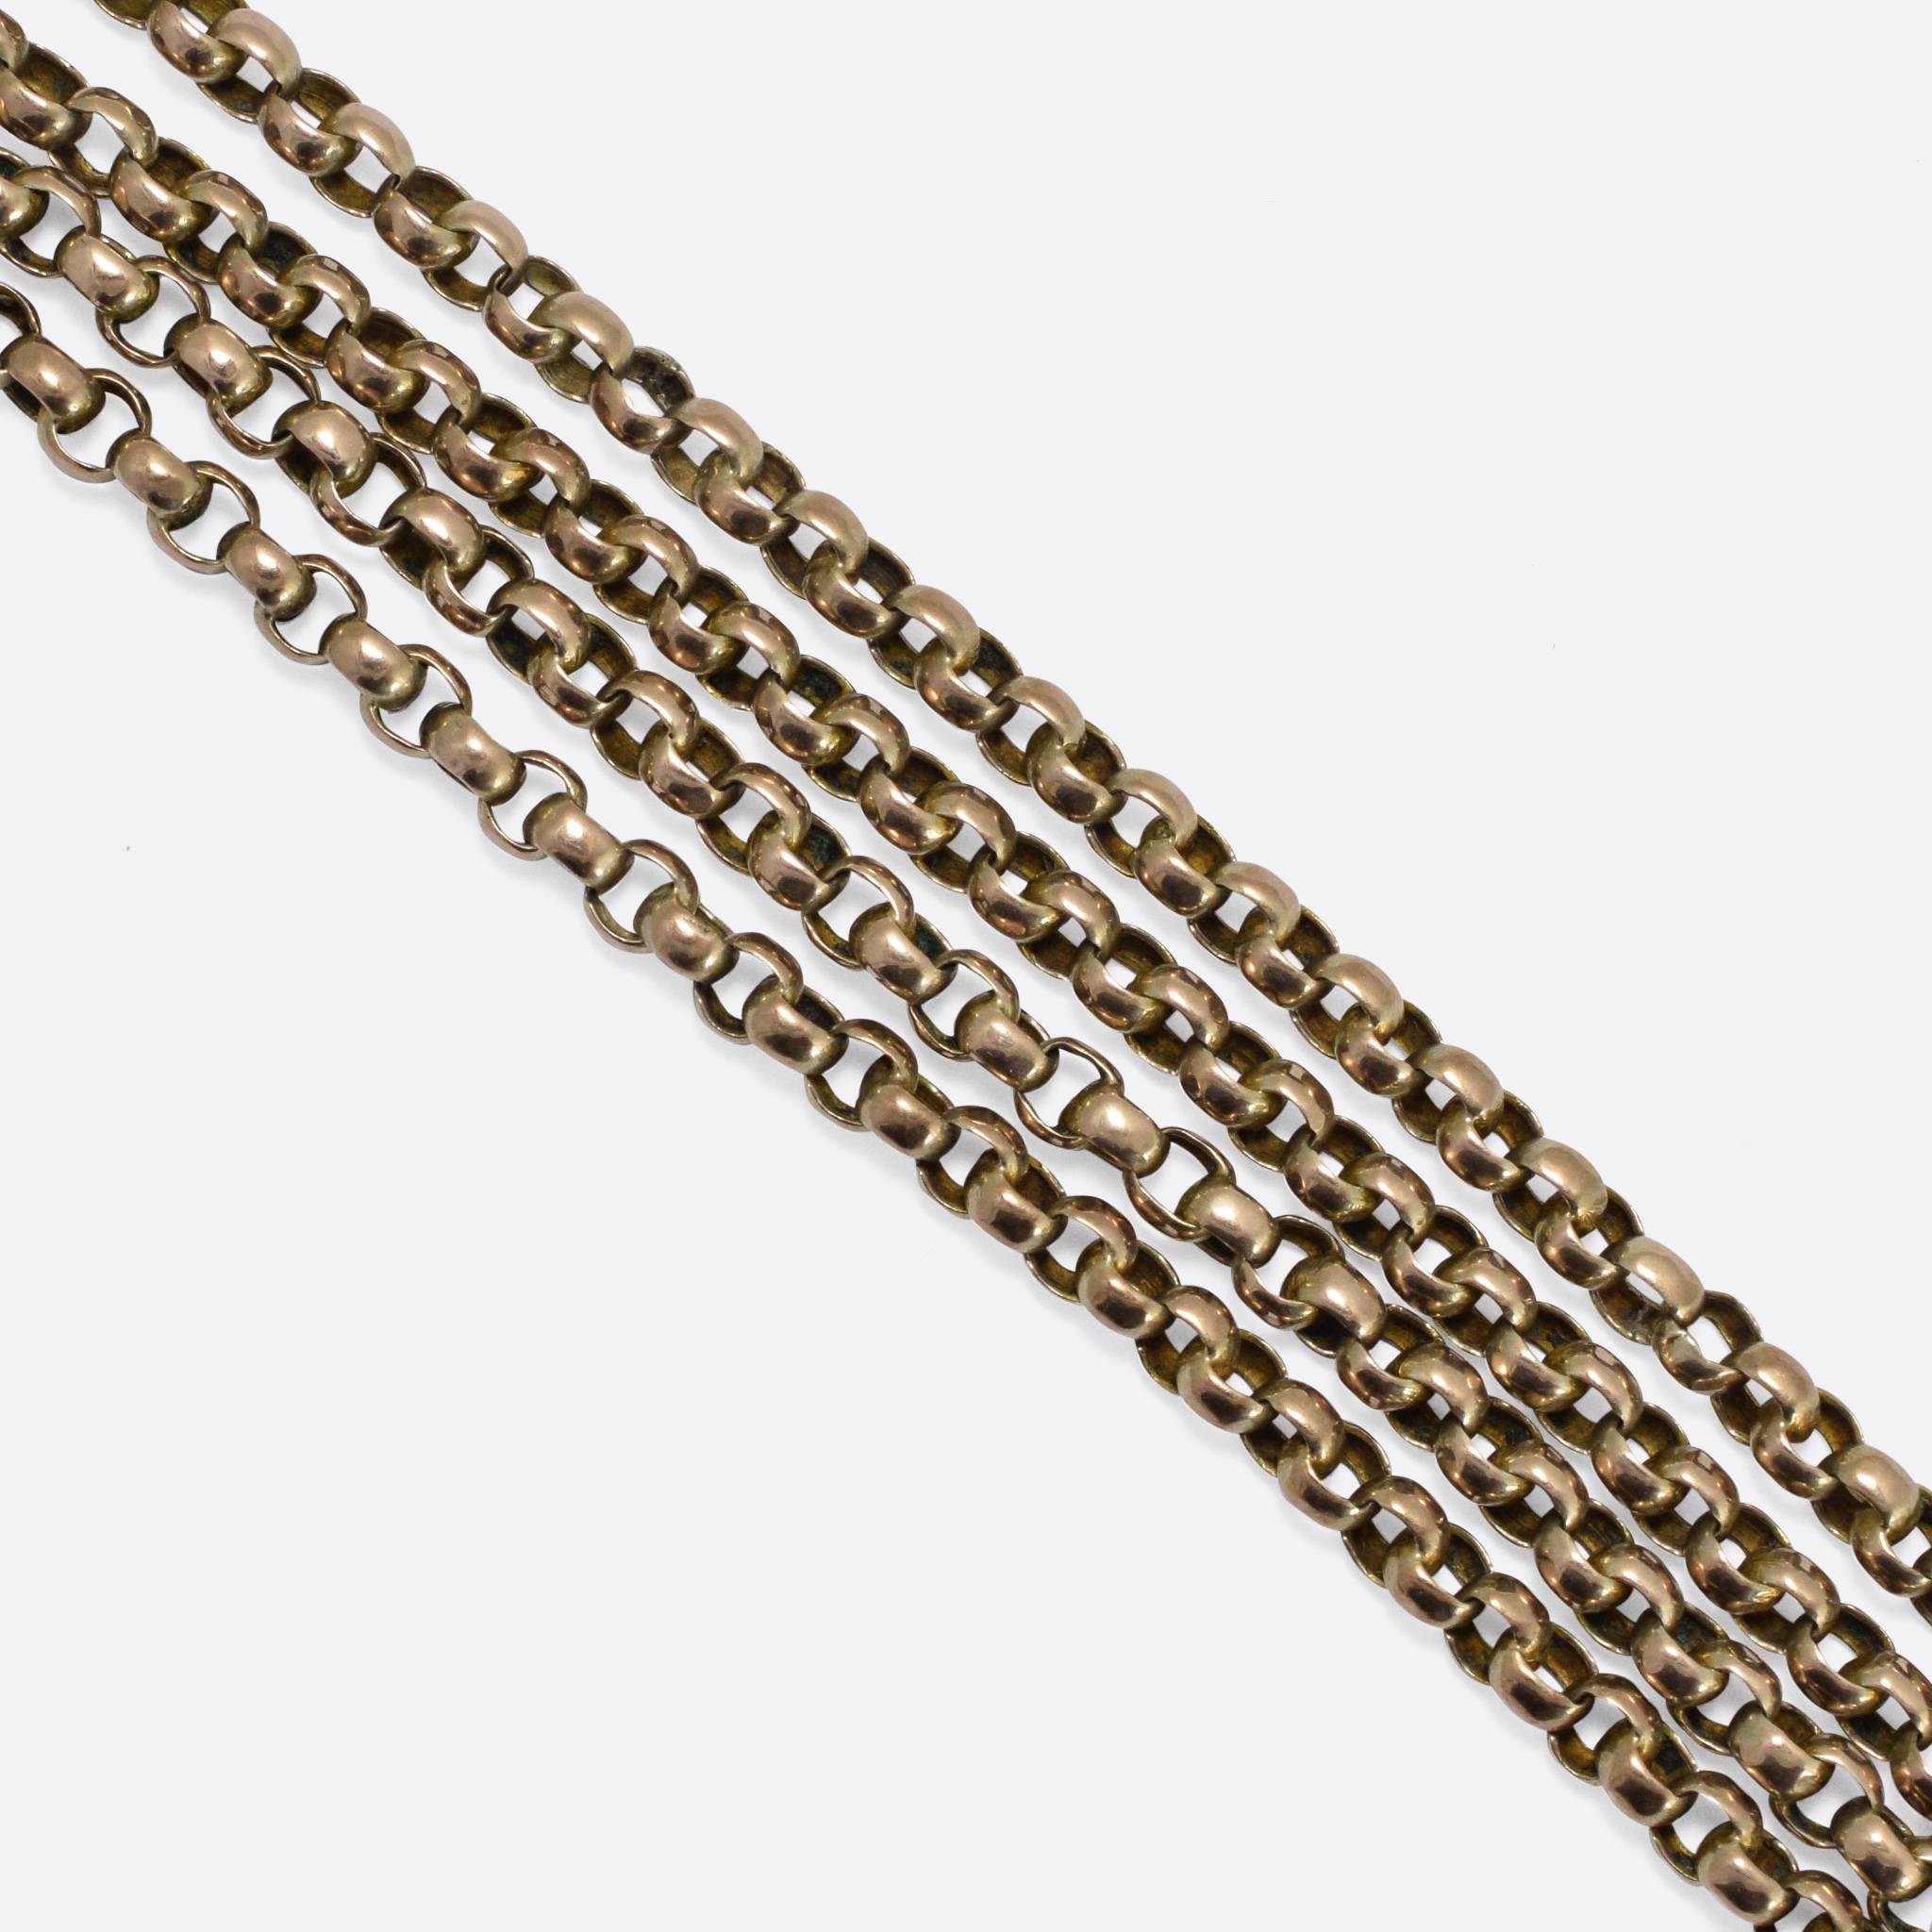 A classic Victorian 9 karat gold guard chain, 48 inches in length with belcher links and a dog tag fastener. Guard chains are long chains that were traditionally used to hold a watch - or sometimes a fur muff, used to keep the hands warm - and were